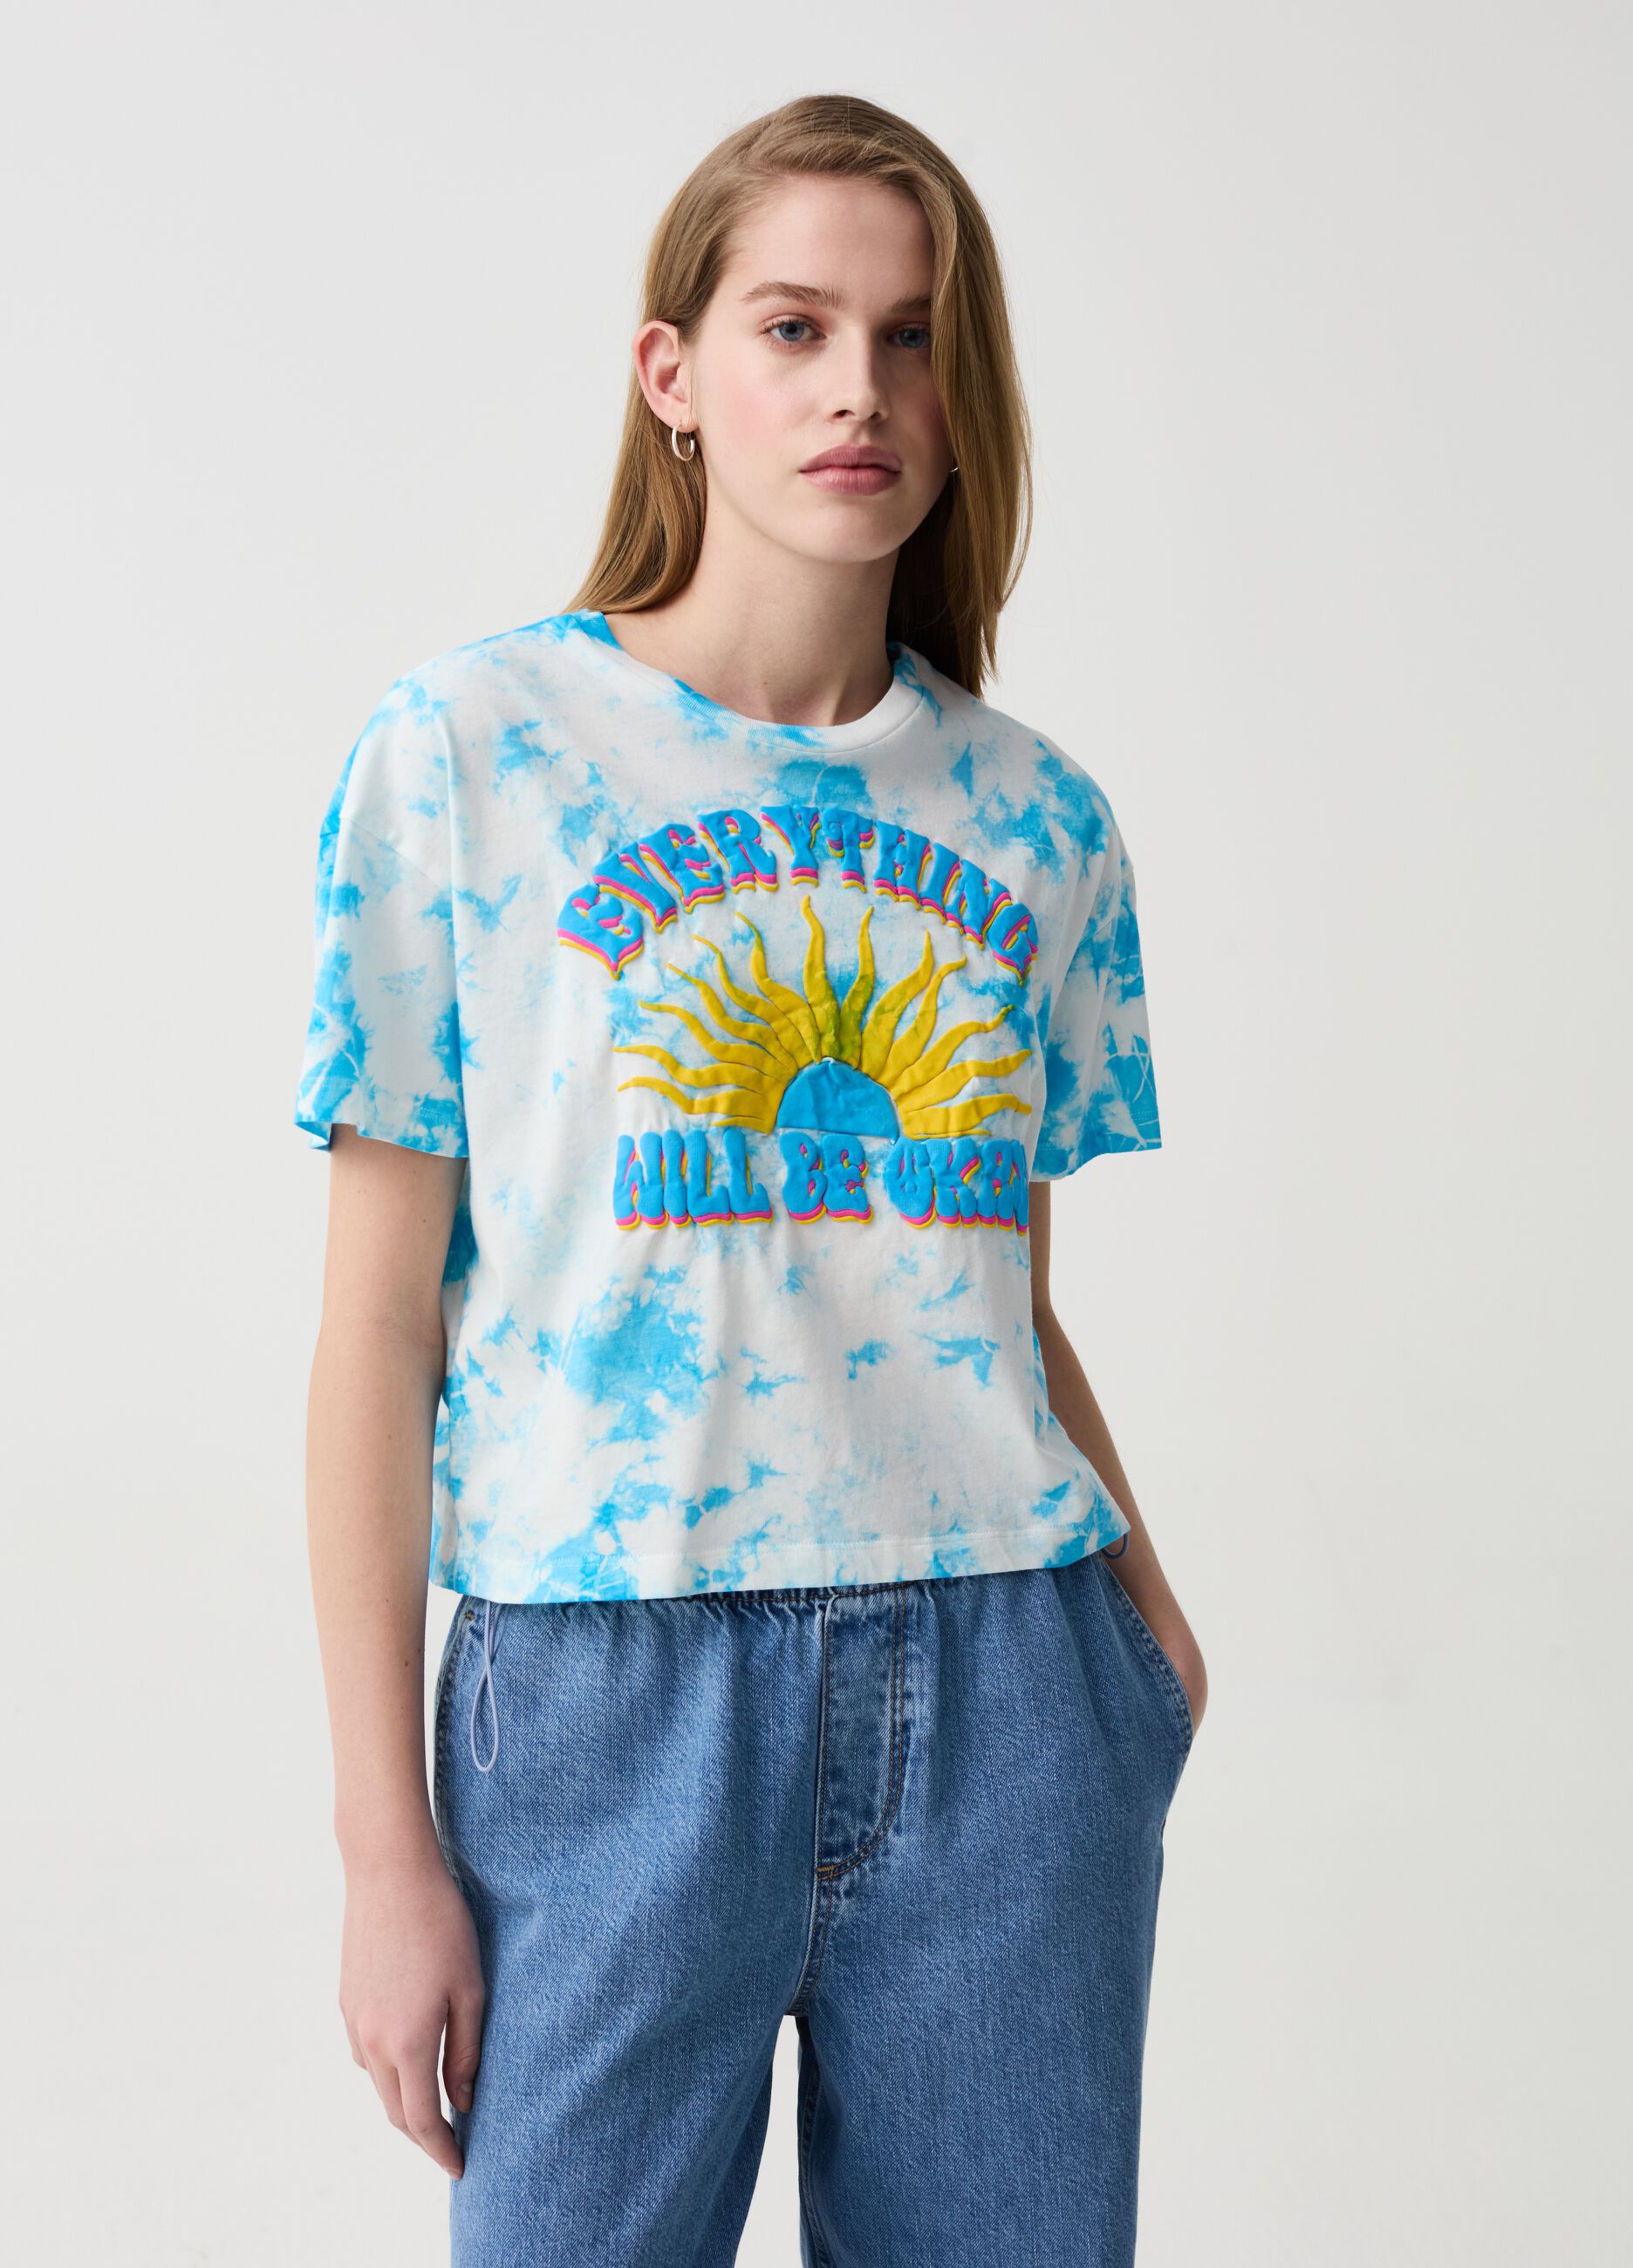 Tie-dye T-shirt with sun and lettering print